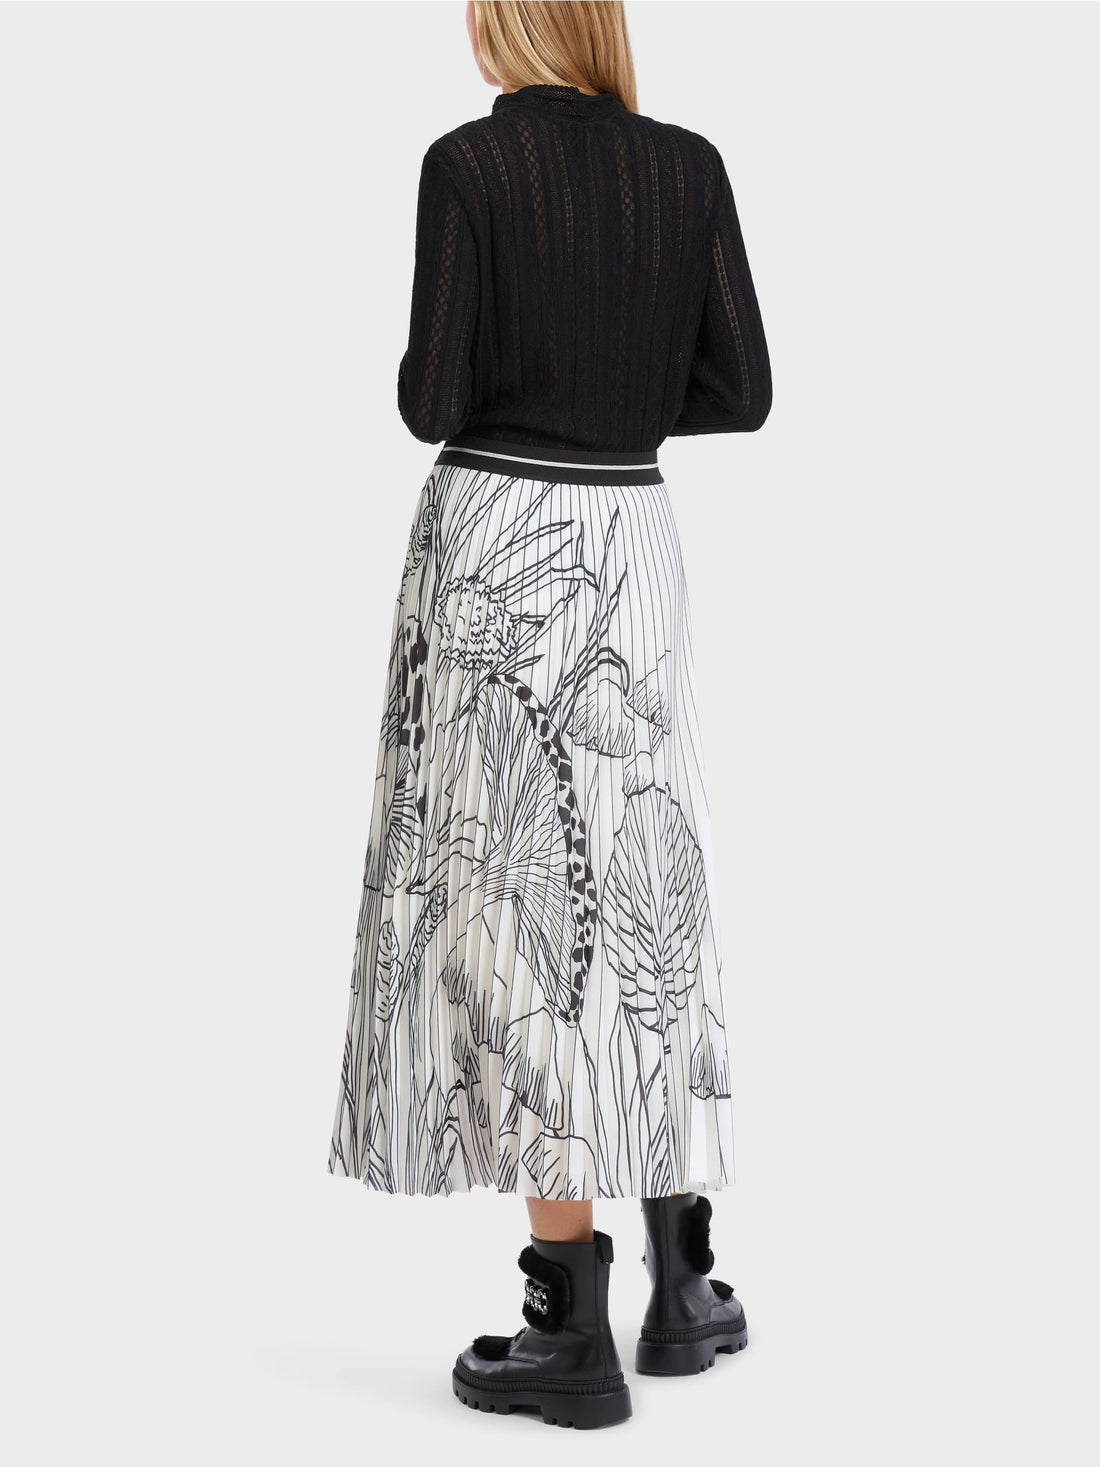 Pleated Rethink Together Print Skirt_VC 71.20 W76_110_02